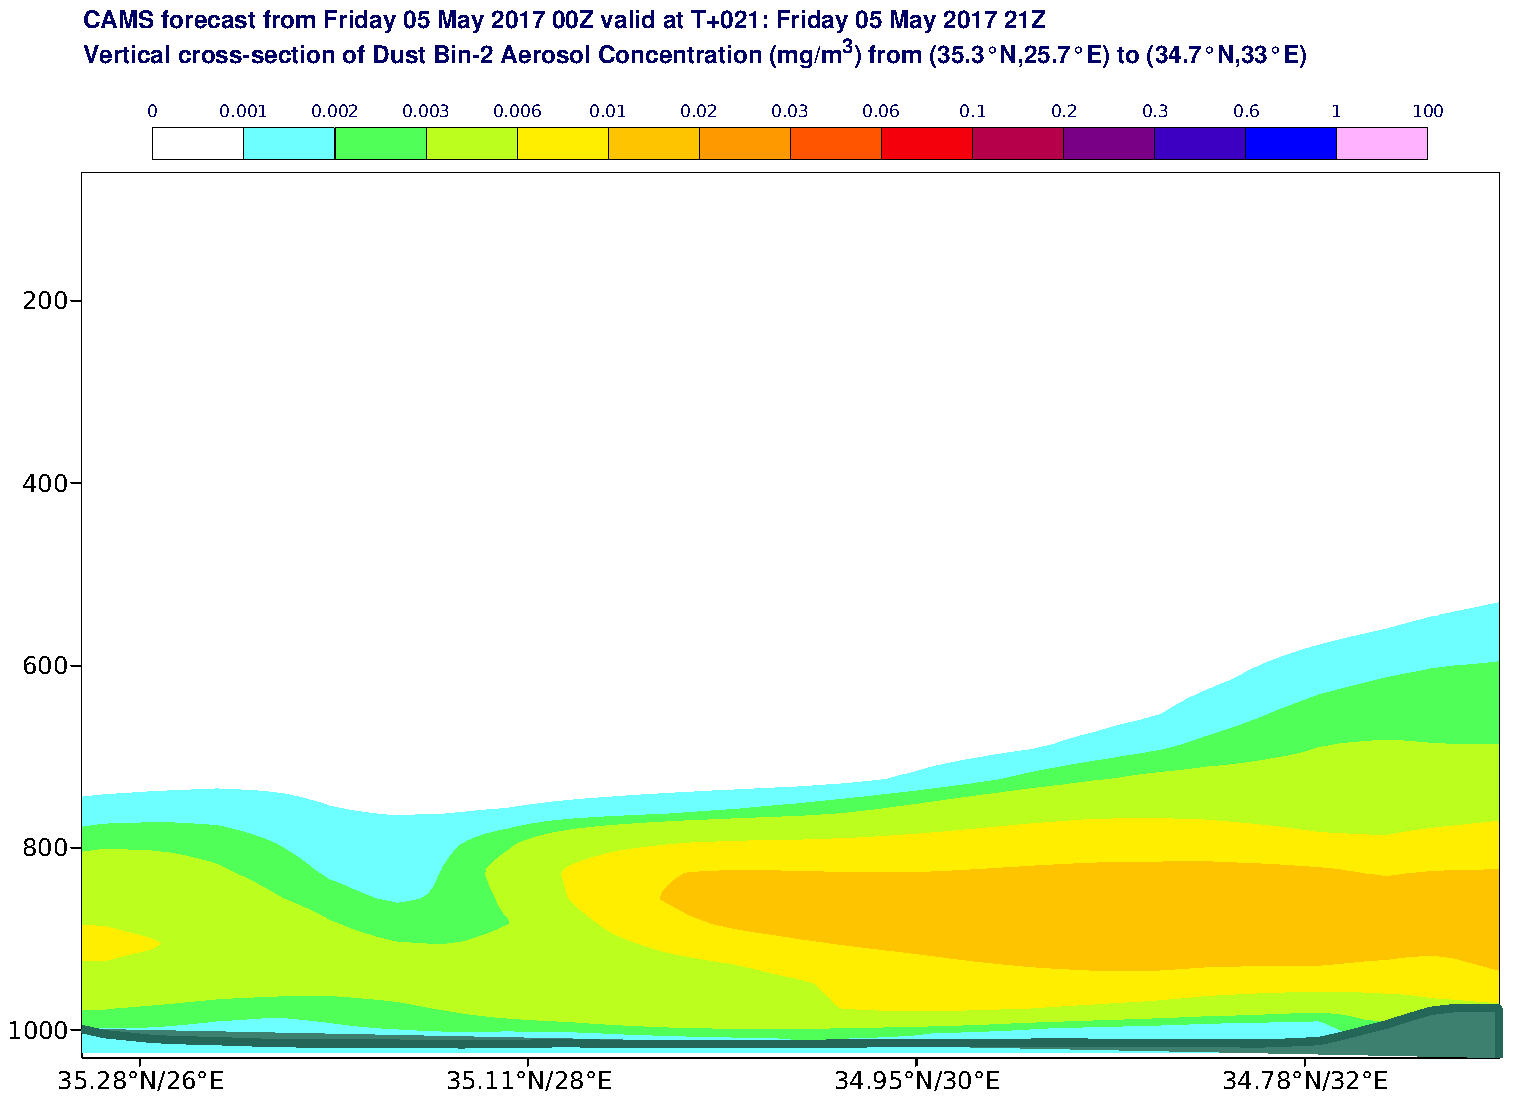 Vertical cross-section of Dust Bin-2 Aerosol Concentration (mg/m3) valid at T21 - 2017-05-05 21:00